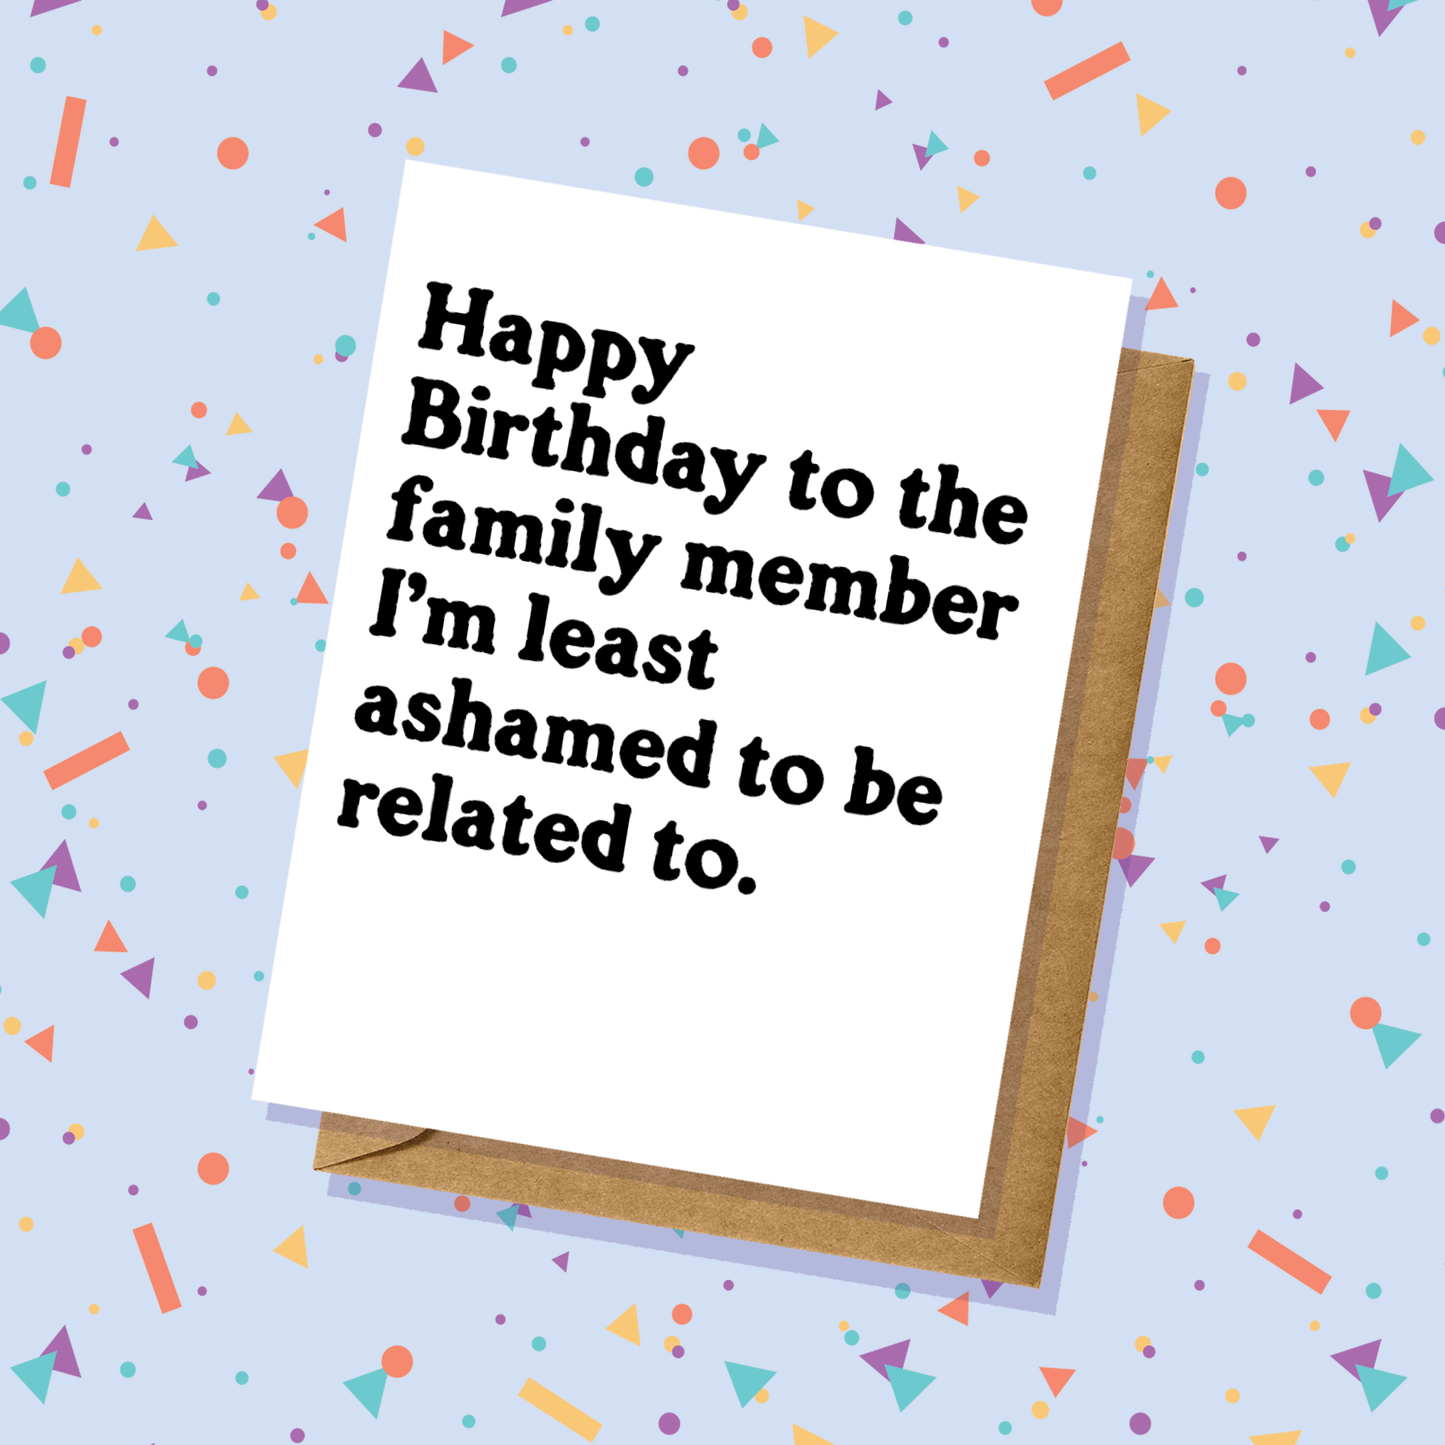 Lucky Mfg. Co. - "My Least Ashamed of Family Member" Birthday Card - Totally Inappropriate